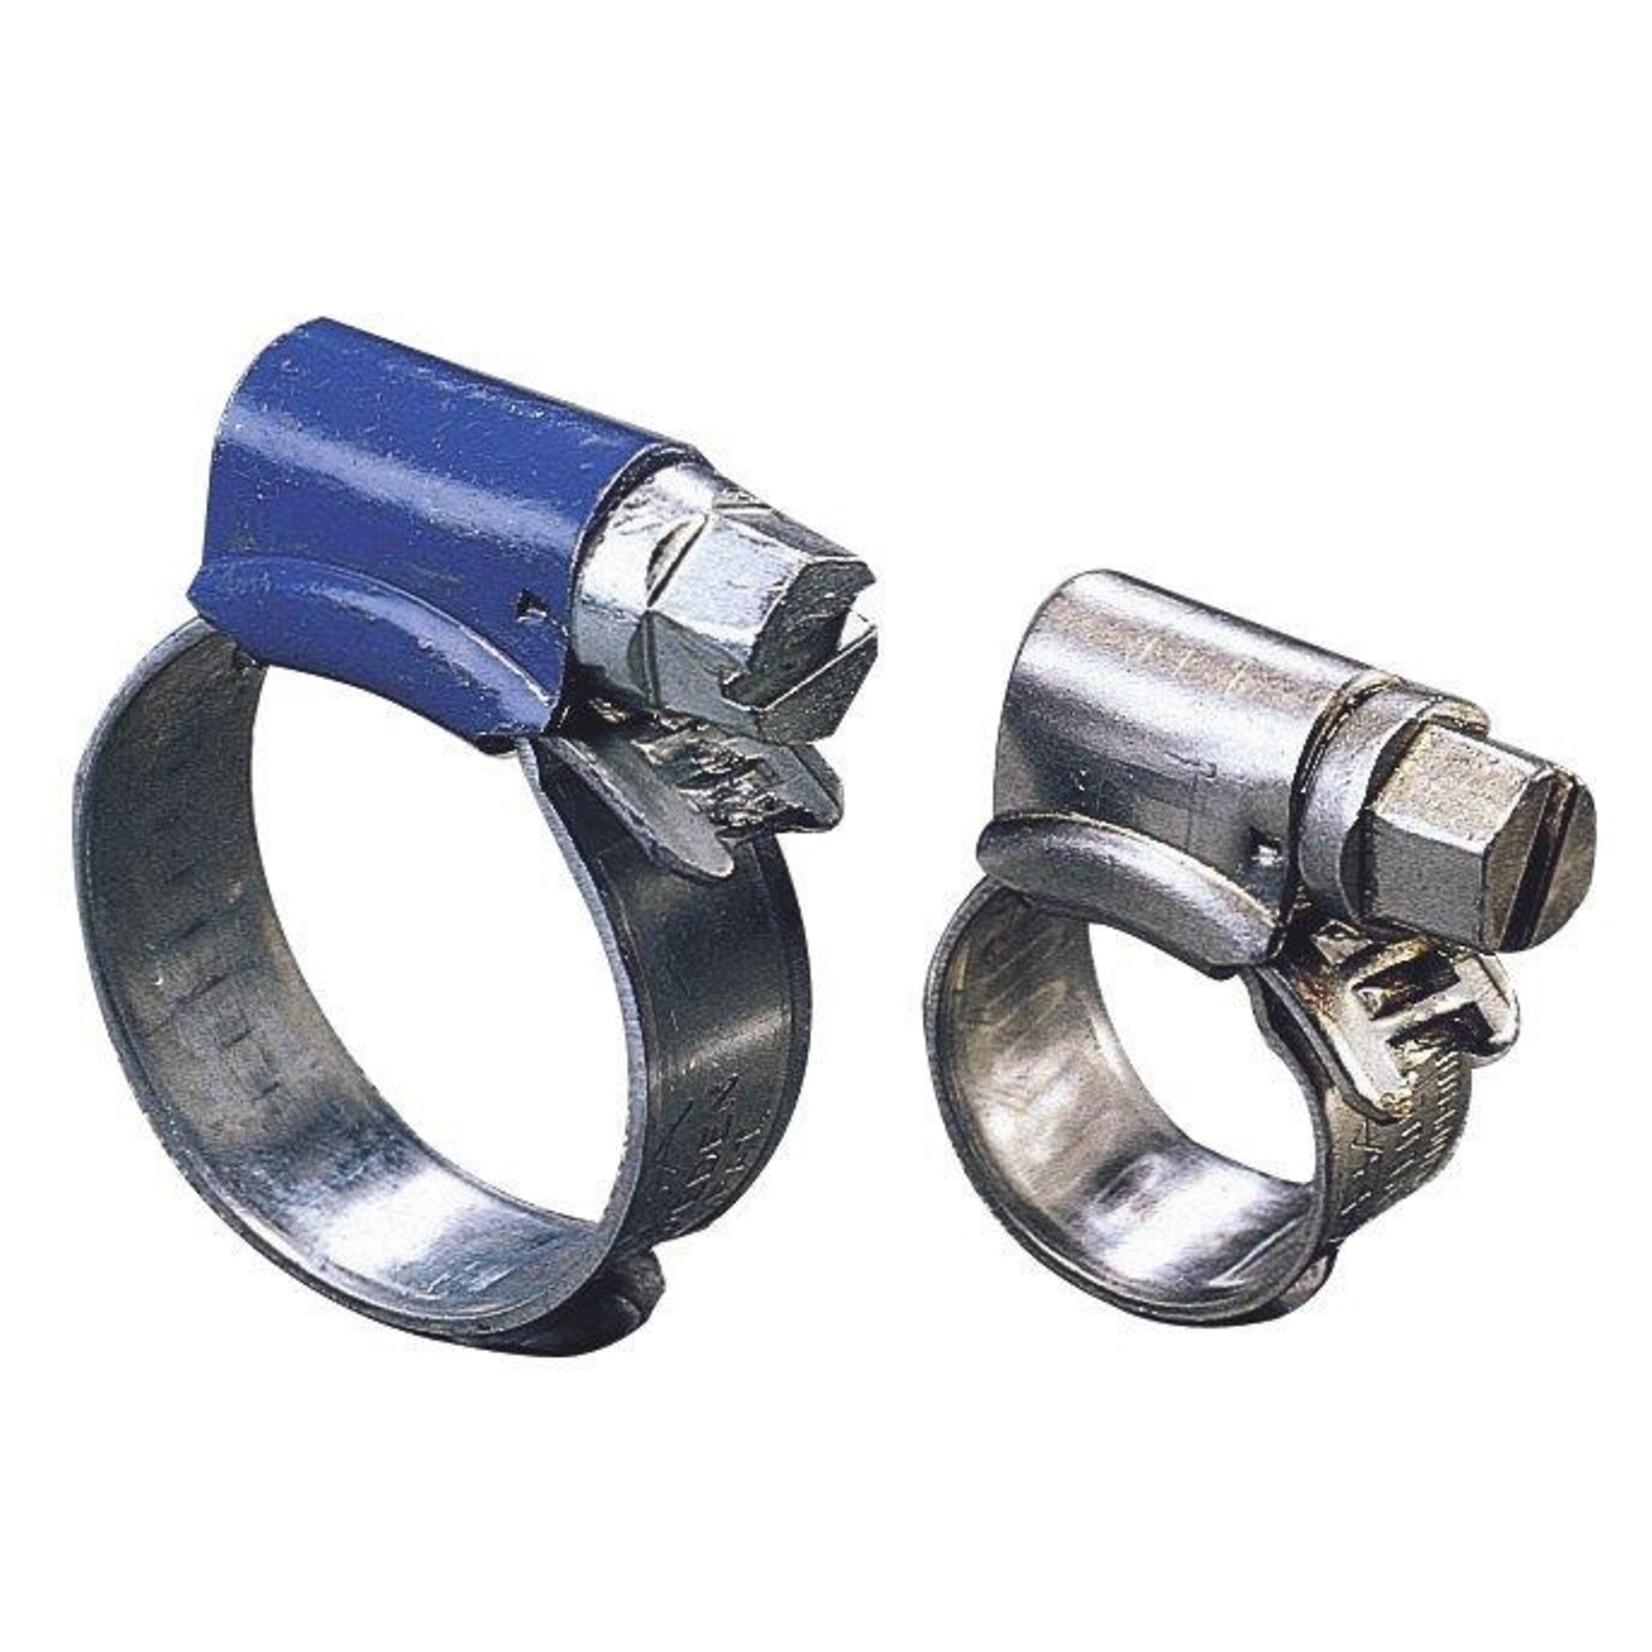 Plastimo Clamp st-steel a4 9mm dia 8.14mm